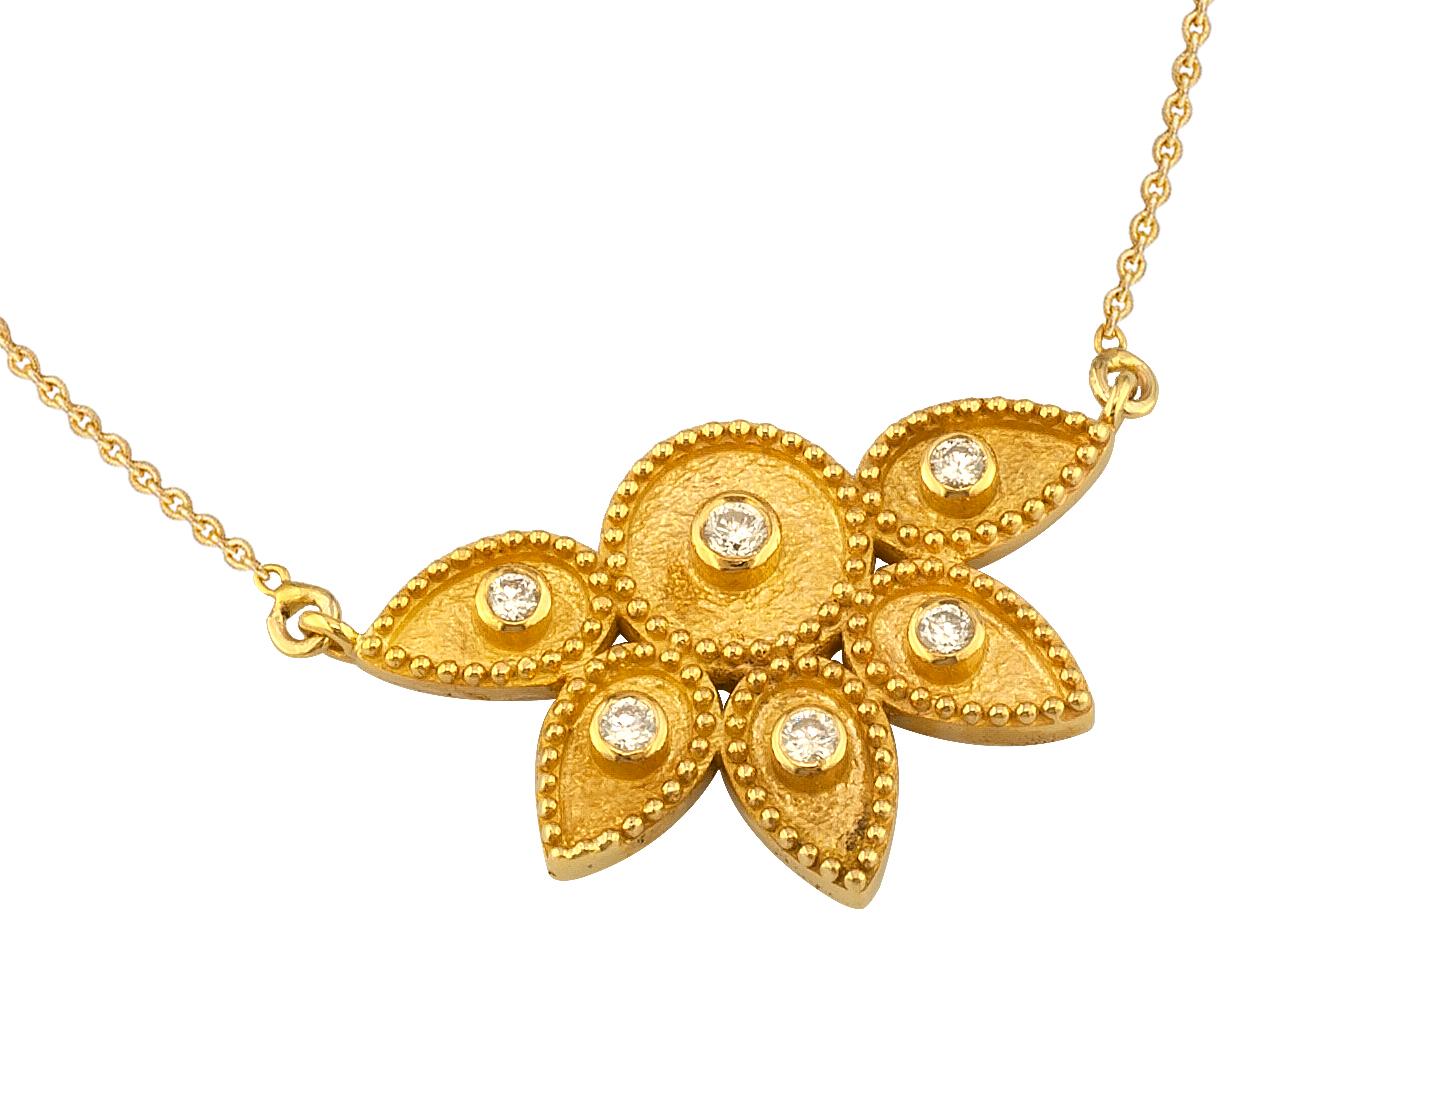 S.Georgios designer chain pendant necklace is 18 Karat yellow gold and microscopically decorated with hand-made bead granulation workmanship, and finished with a unique velvet background look. This beautiful floral pendant features 6 brilliant-cut